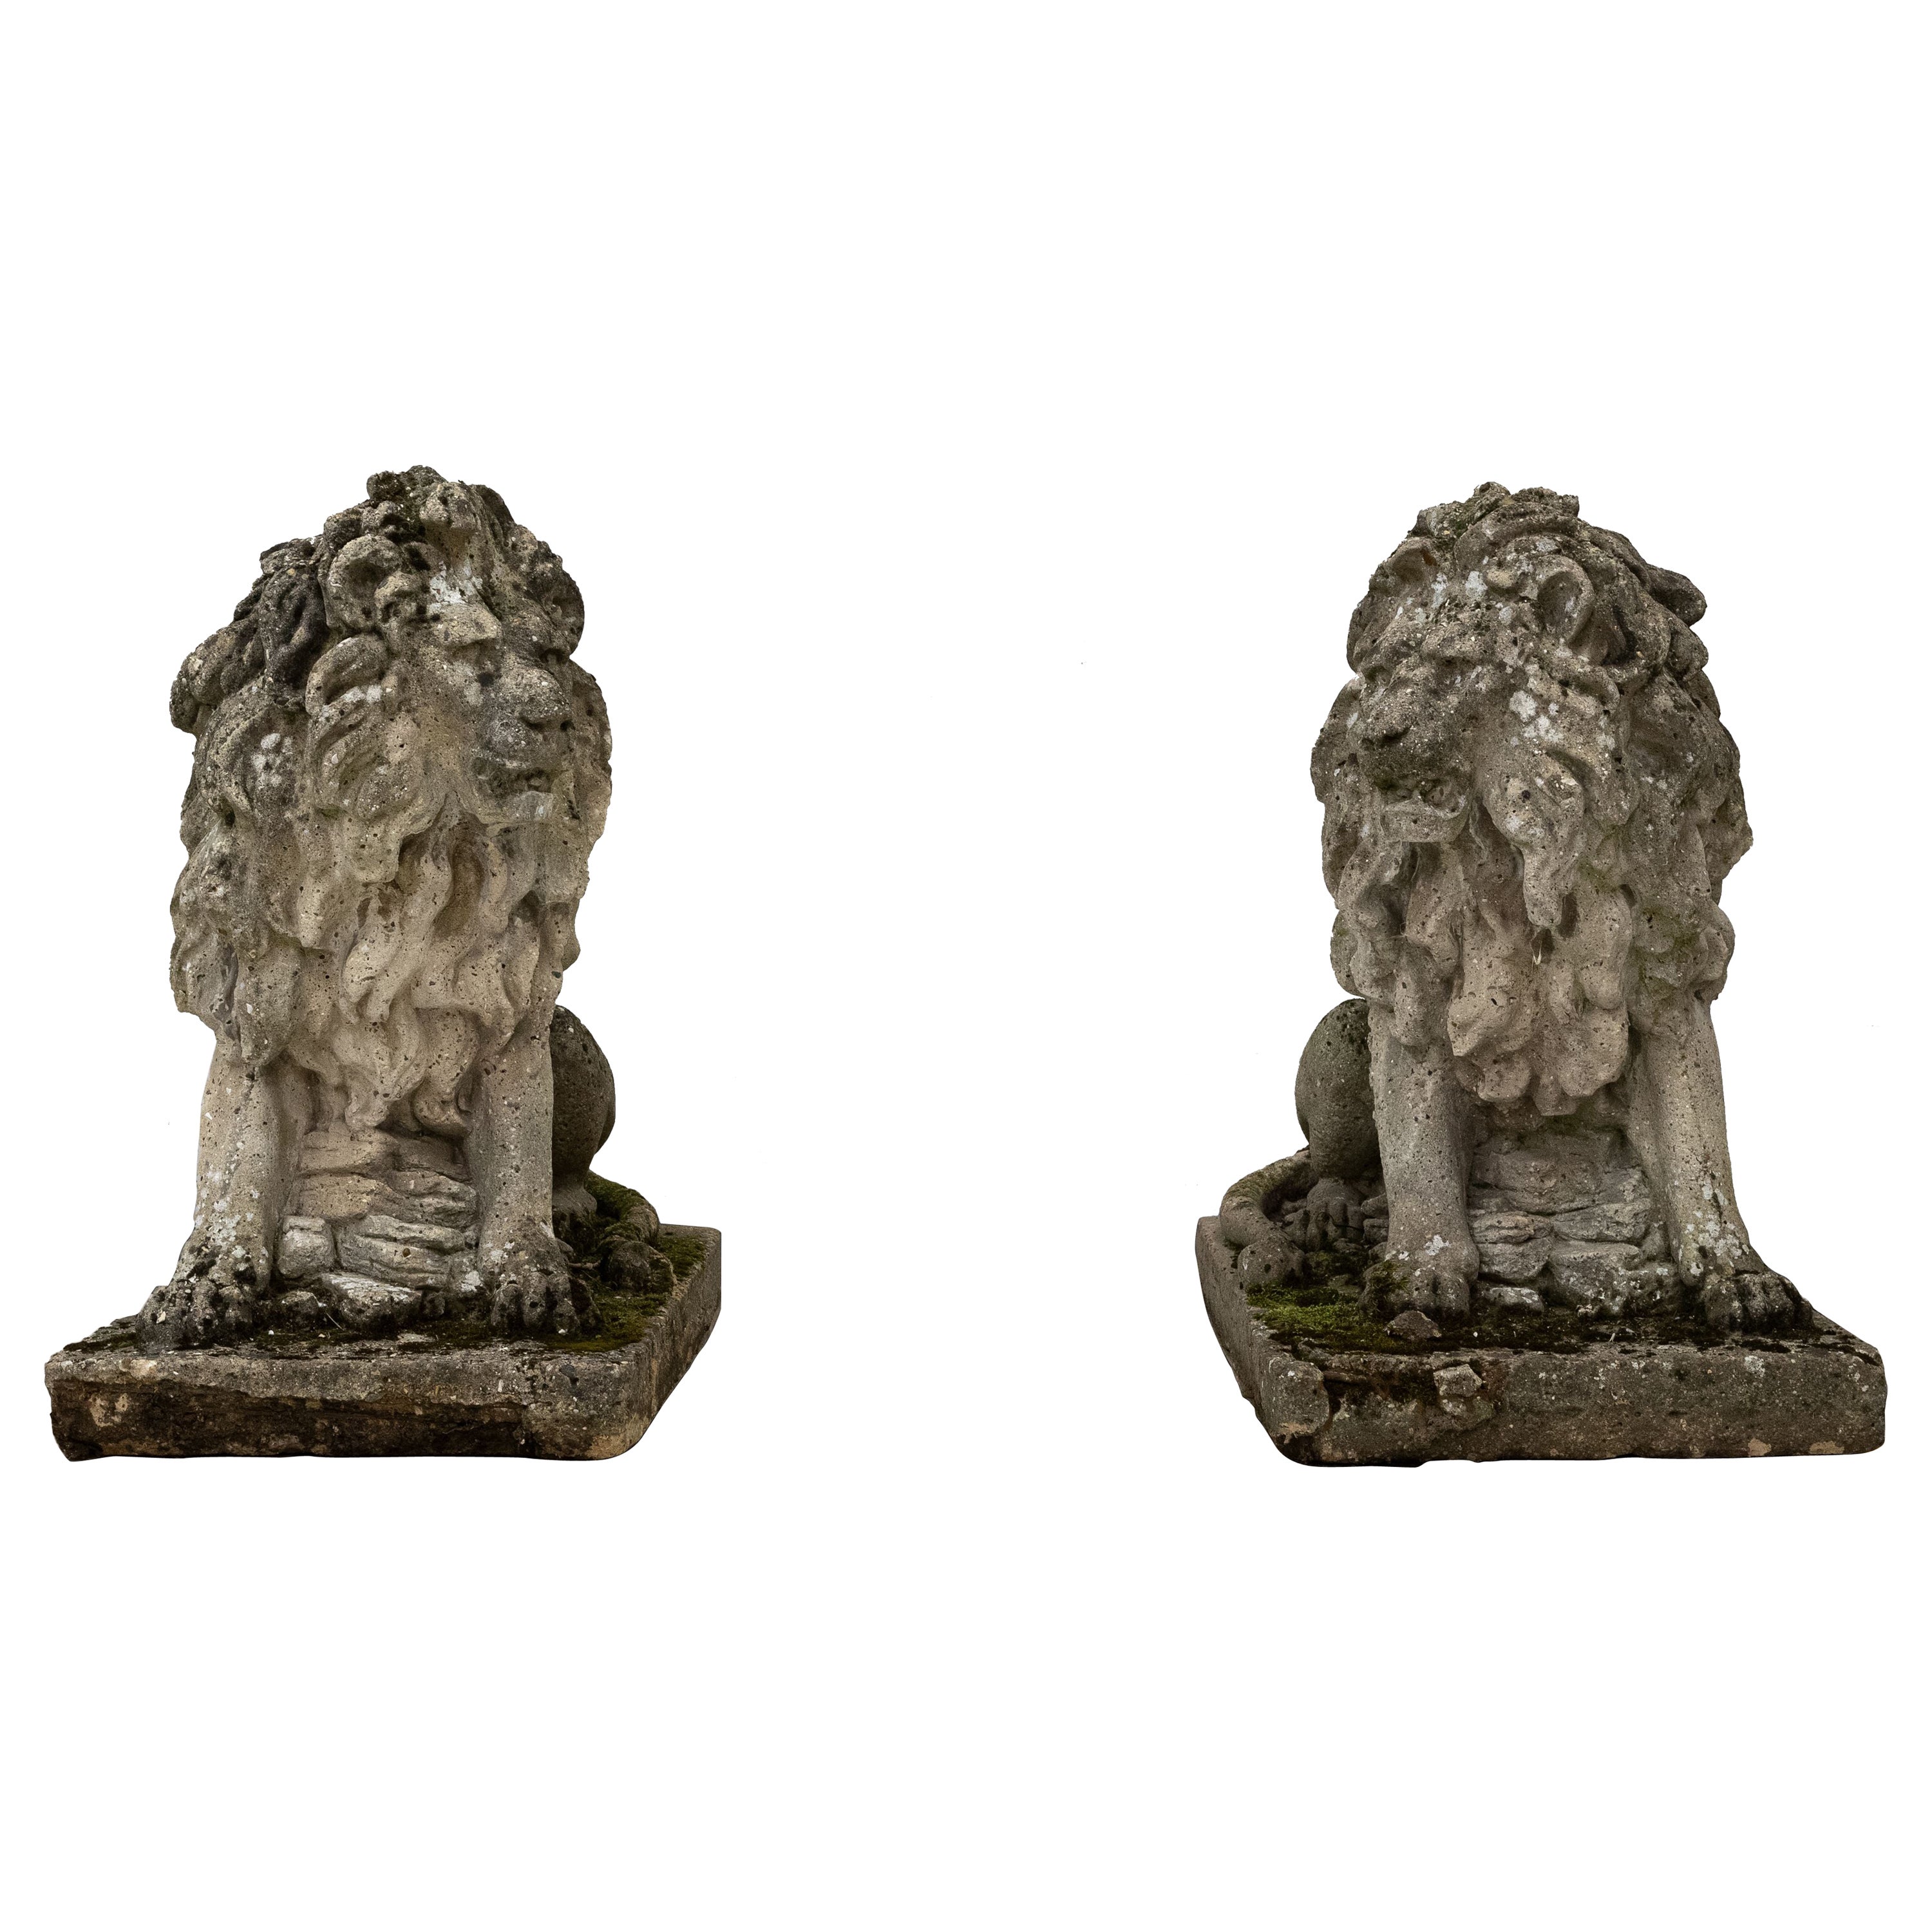 Pair of Monumental Reclaimed Stone Lions